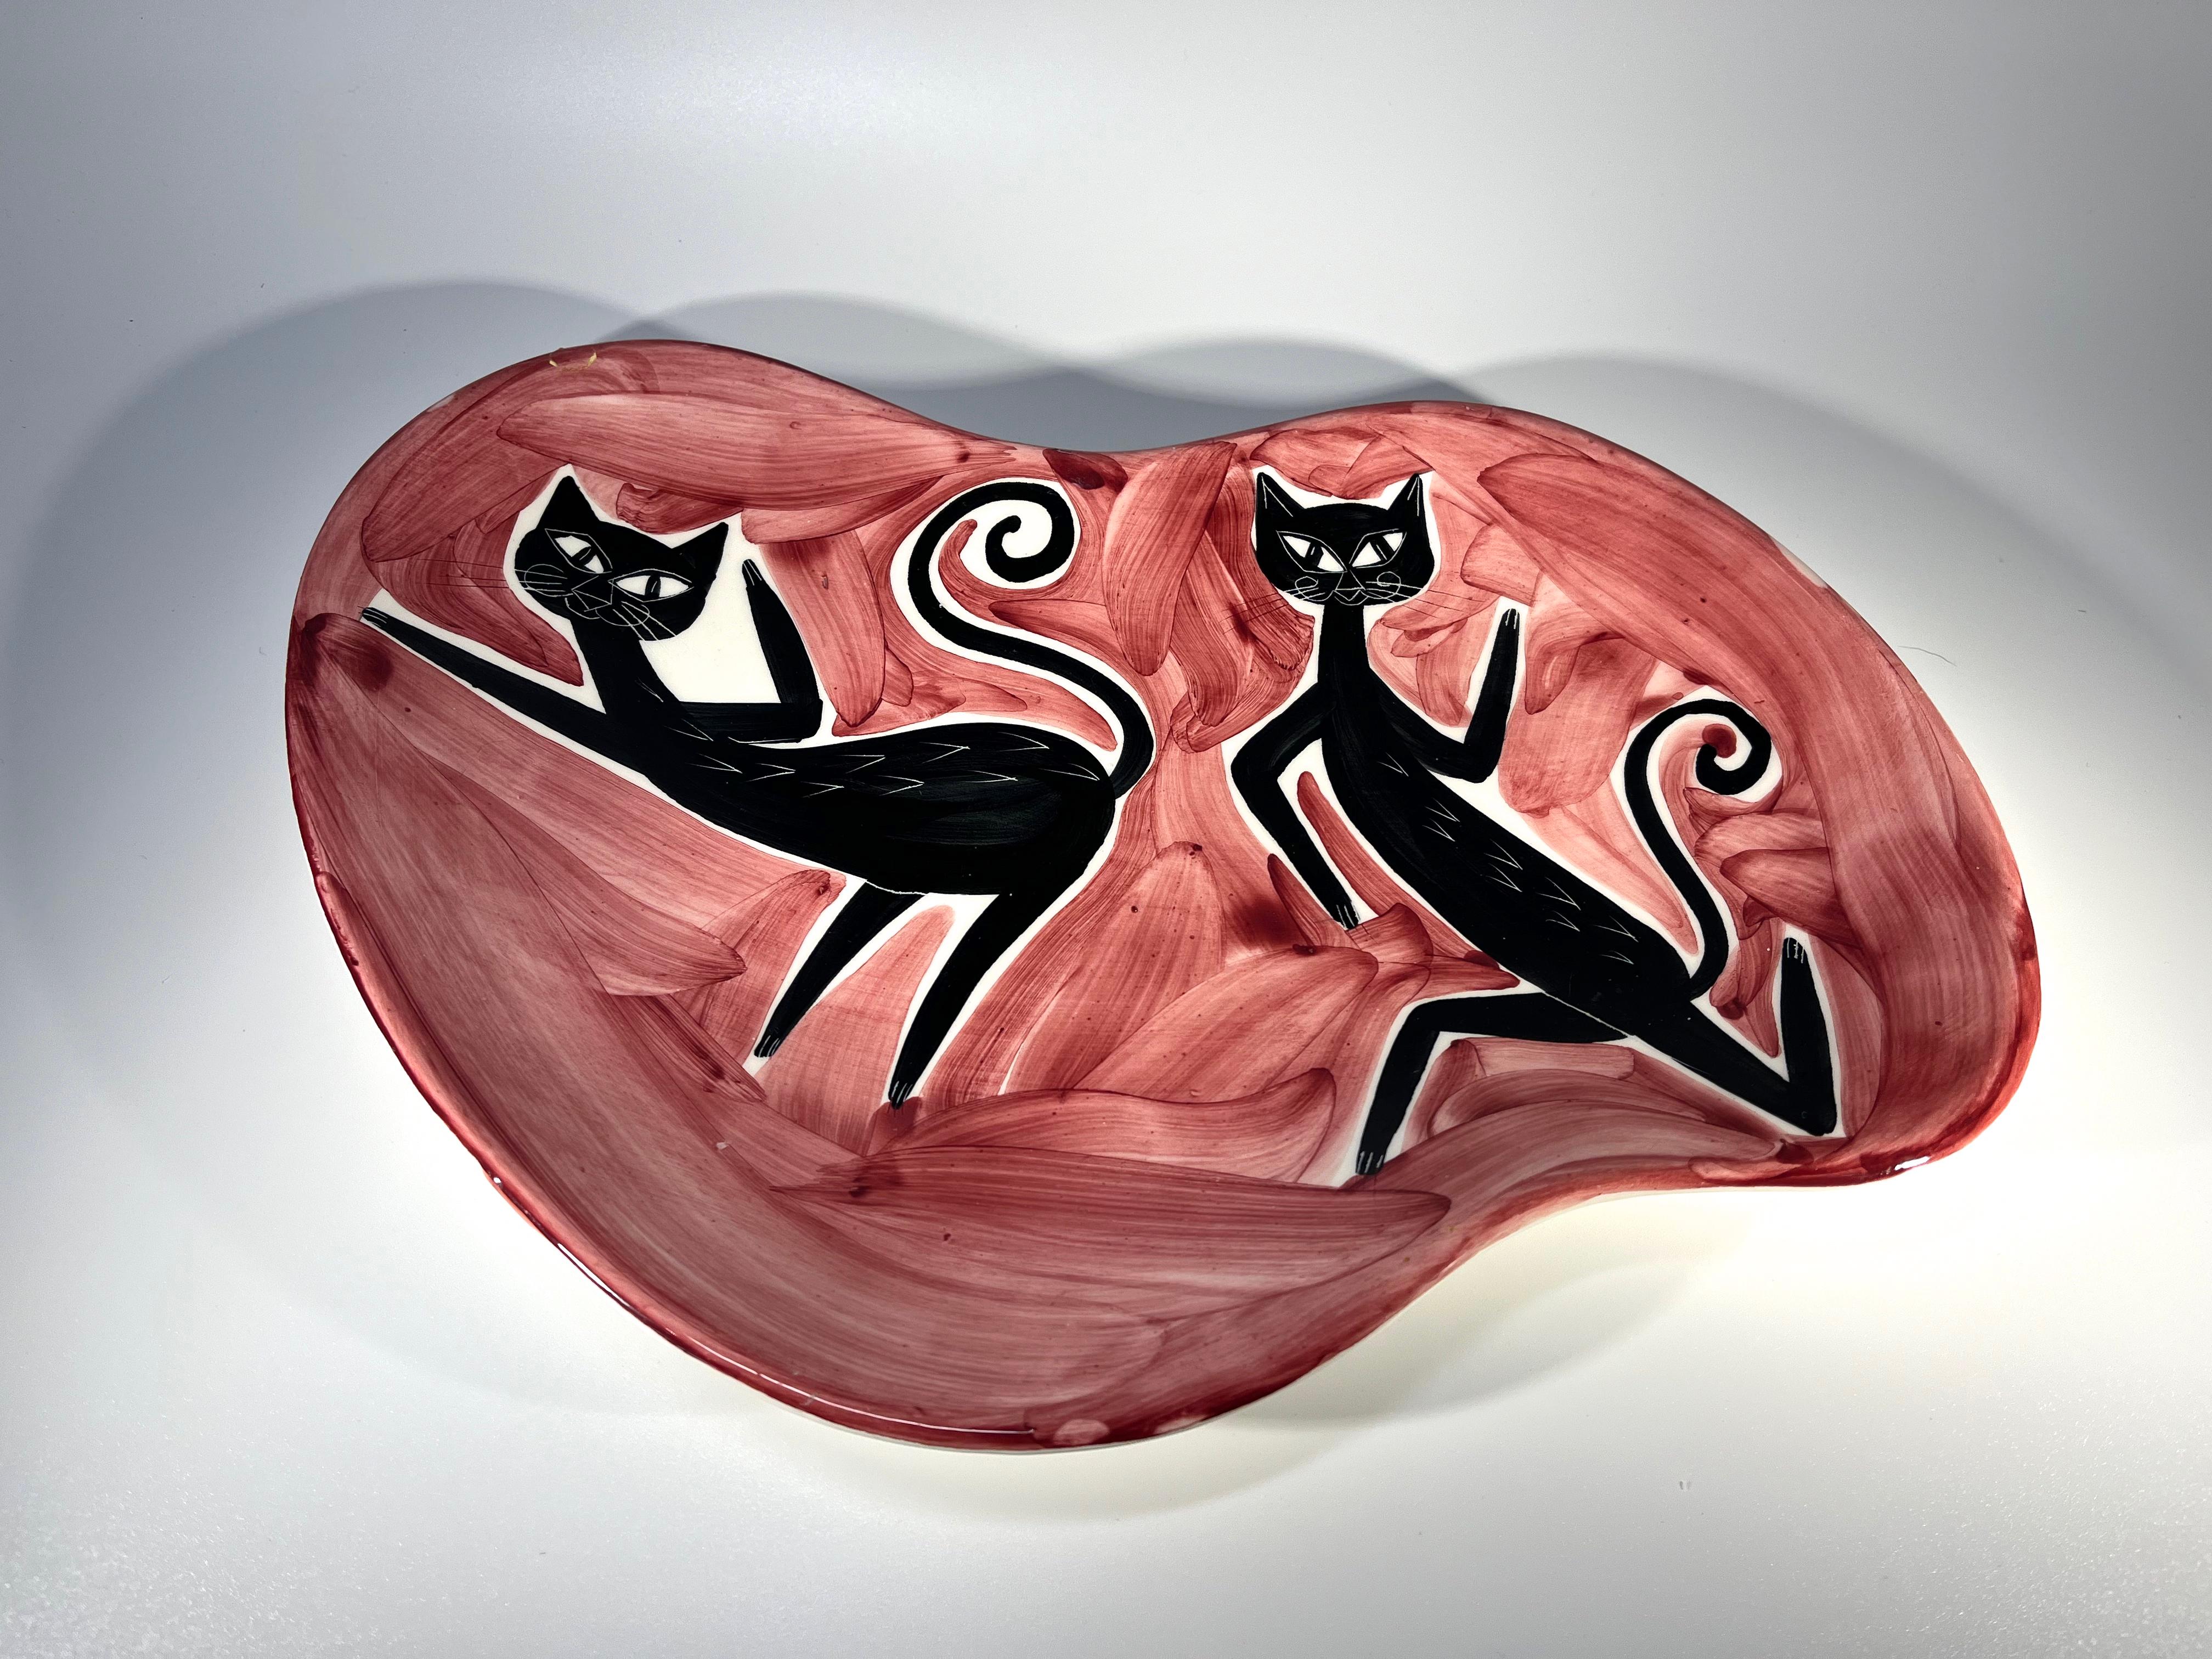 Glazed Alley Cats Ceramic Abstract Platter, Attributed To Alessio Tasca, Nove, Italy For Sale